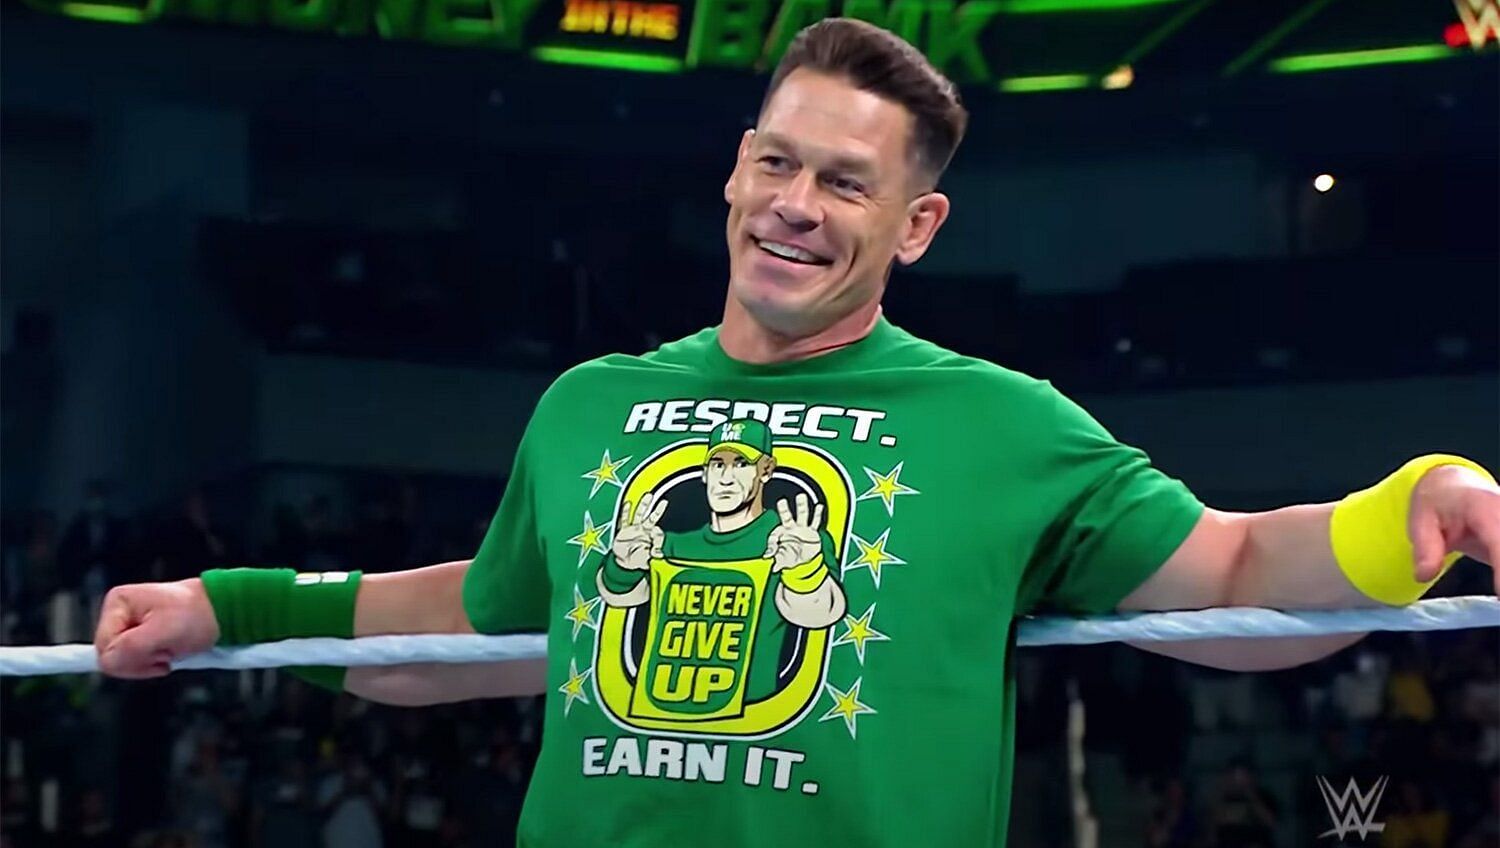 John Cena has lauded R-Truth and his WWE gimmick